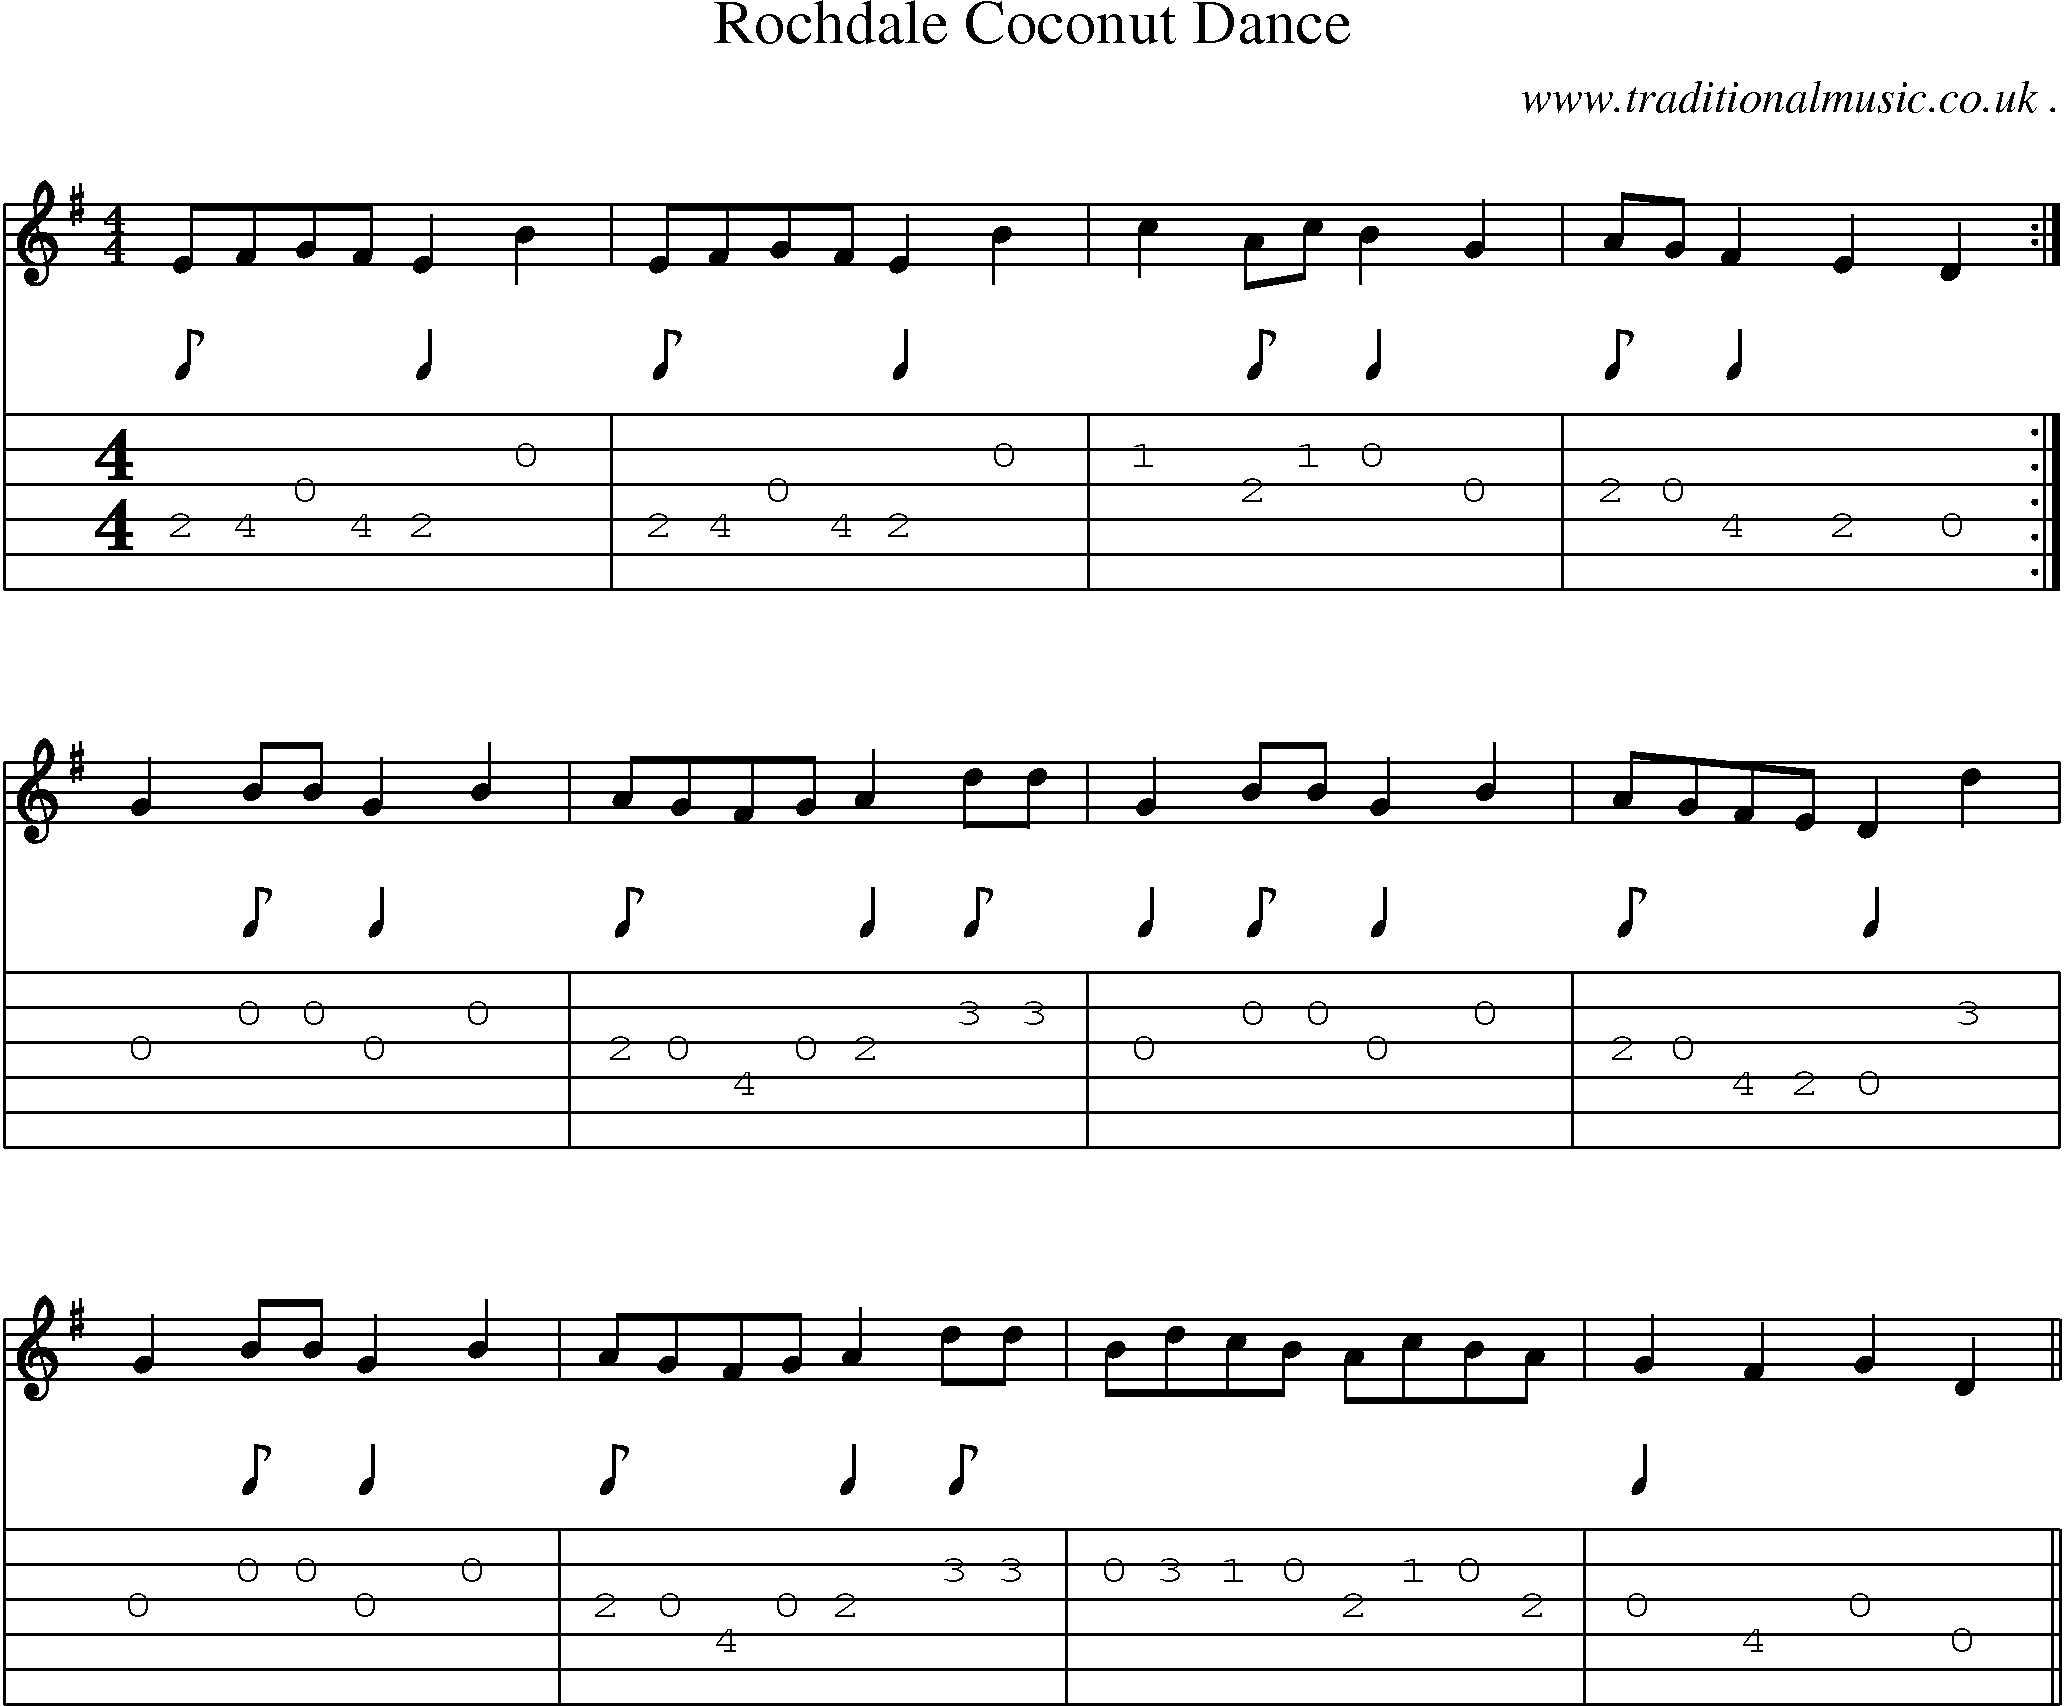 Sheet-Music and Guitar Tabs for Rochdale Coconut Dance